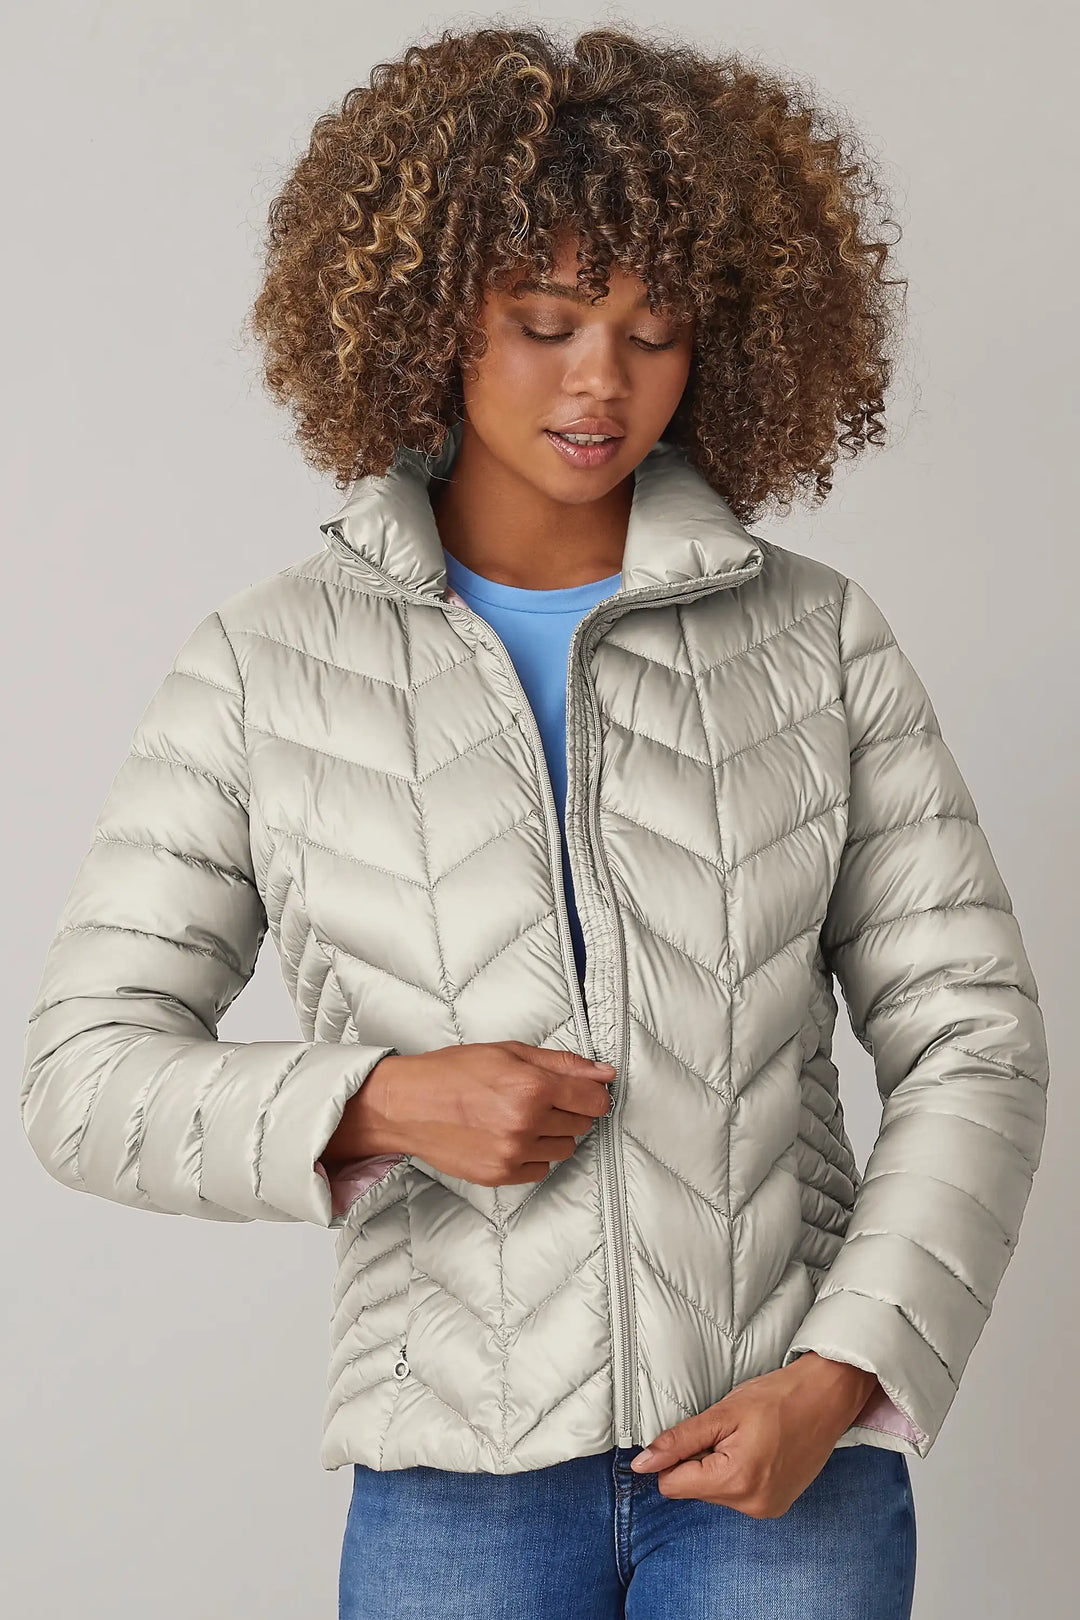 Woman wearing a champagne coloured quilted jacket with high collar and full-length zipper, over a blue shirt and jeans, style 0124-2040-62-11